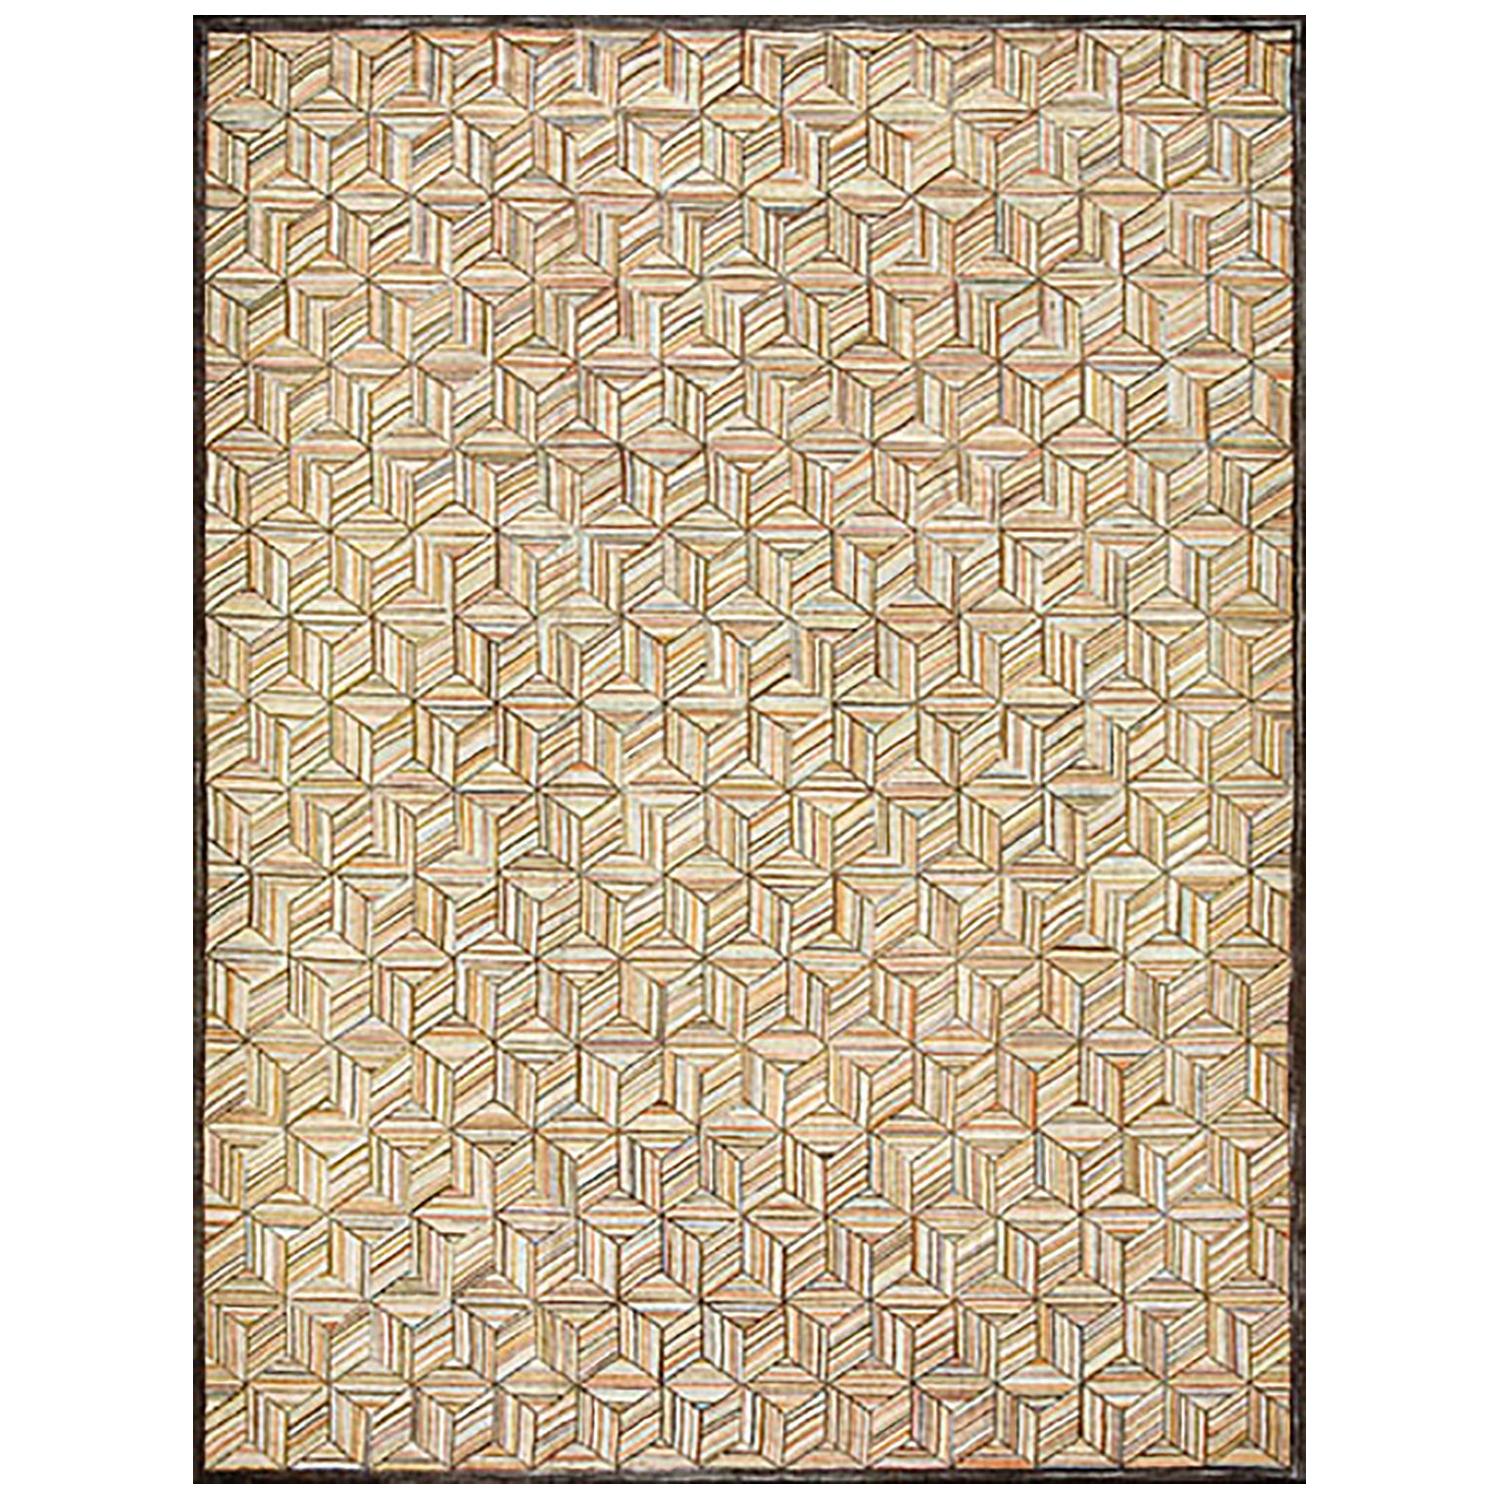 Contemporary American Hooked Rug (9' x 12' - 274 x 365 ) For Sale